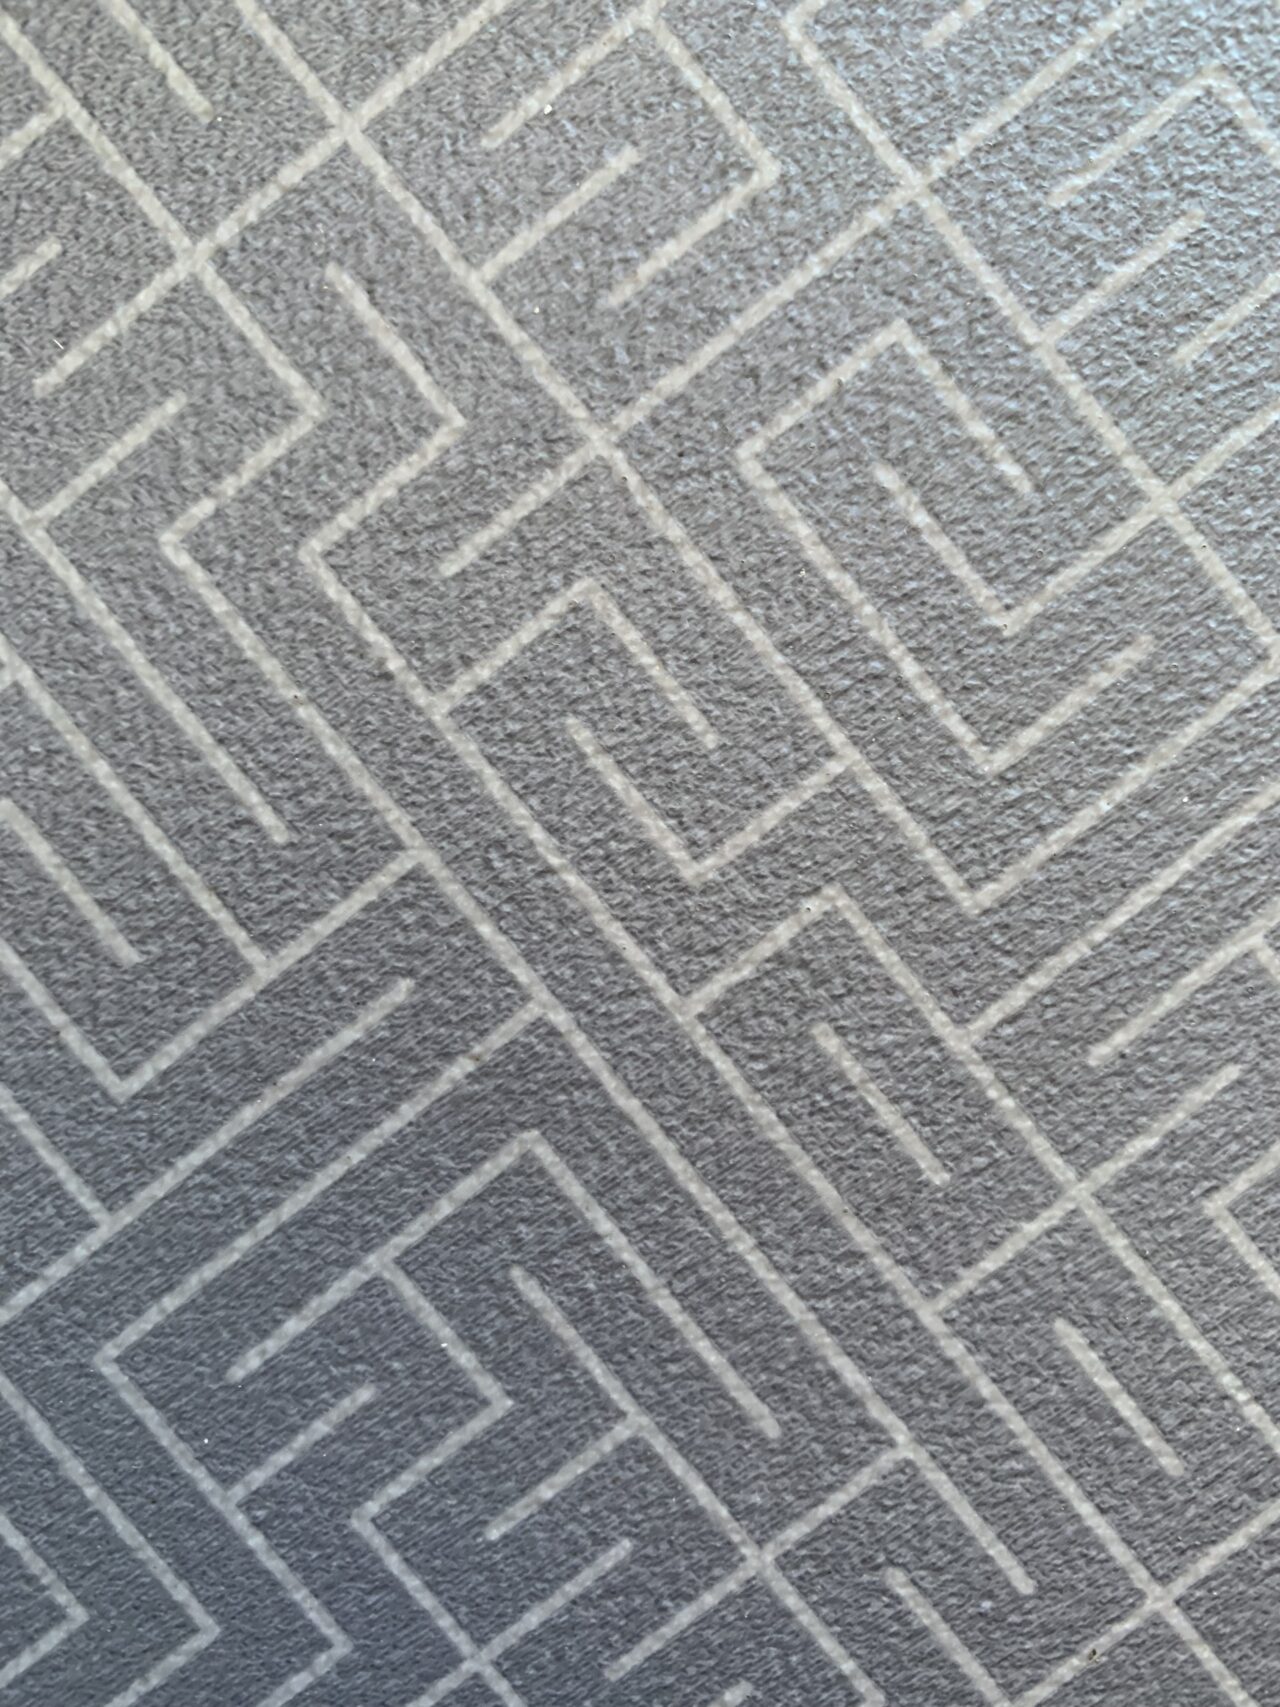 Gray Labyrinth Floor Lines texture Pattern